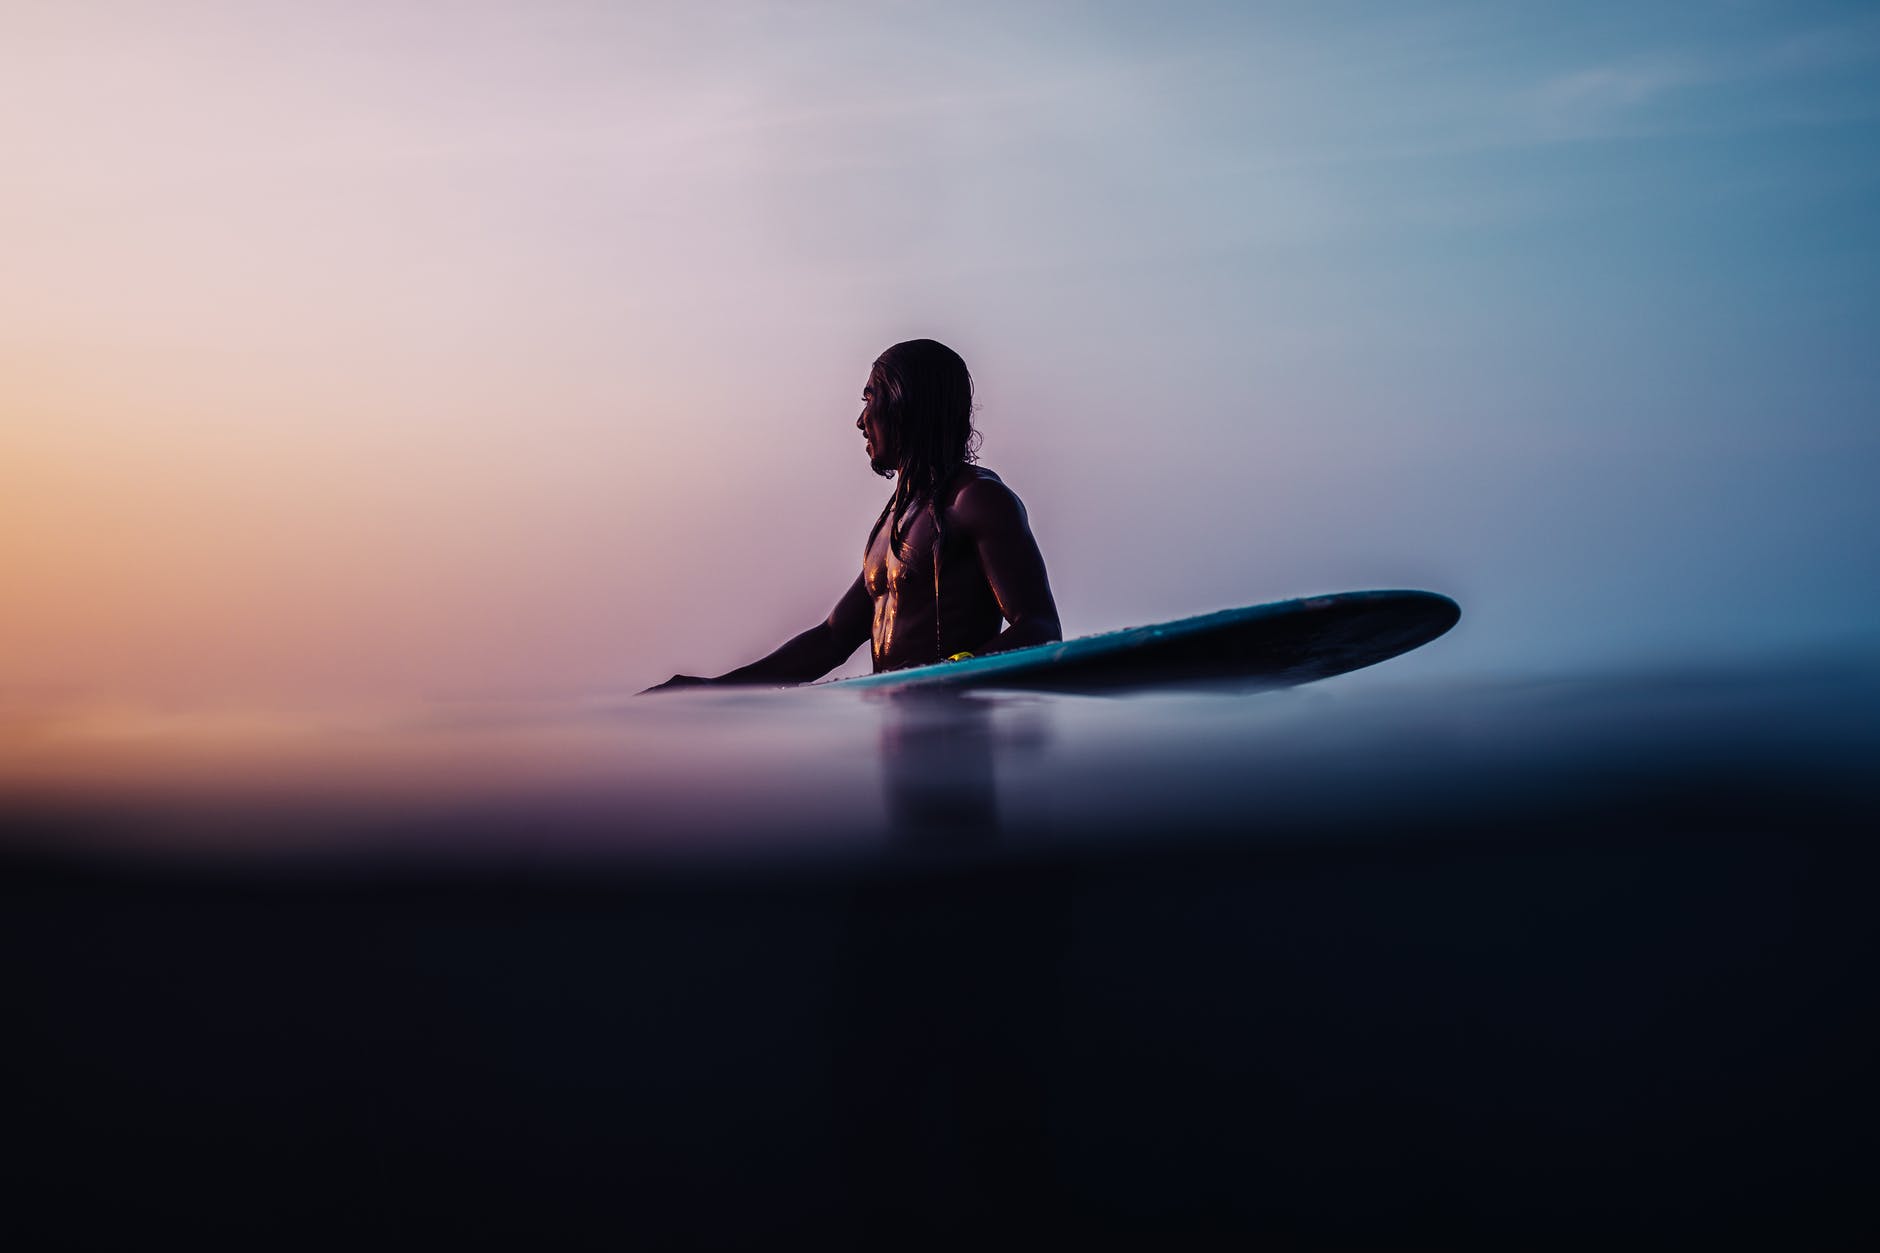 surfer with surfboard standing on sea shore